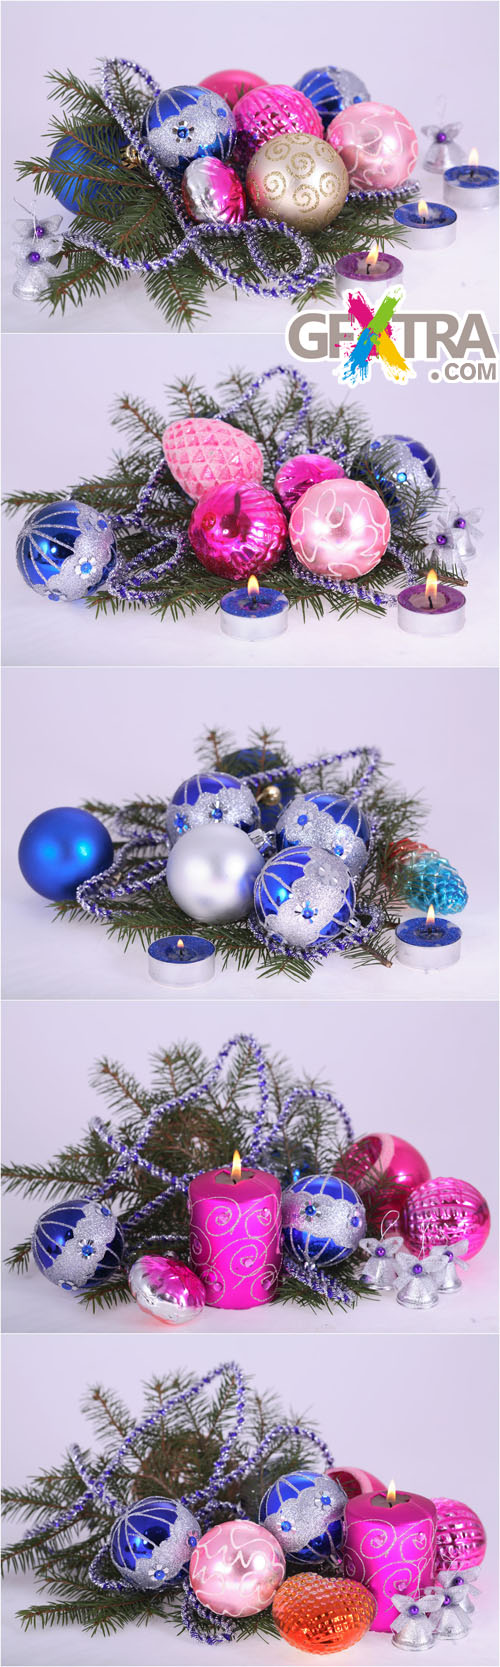 Christmas Ornaments 2 - Photo Cliparts - Balloons, Christmas Tree Branches, Candles